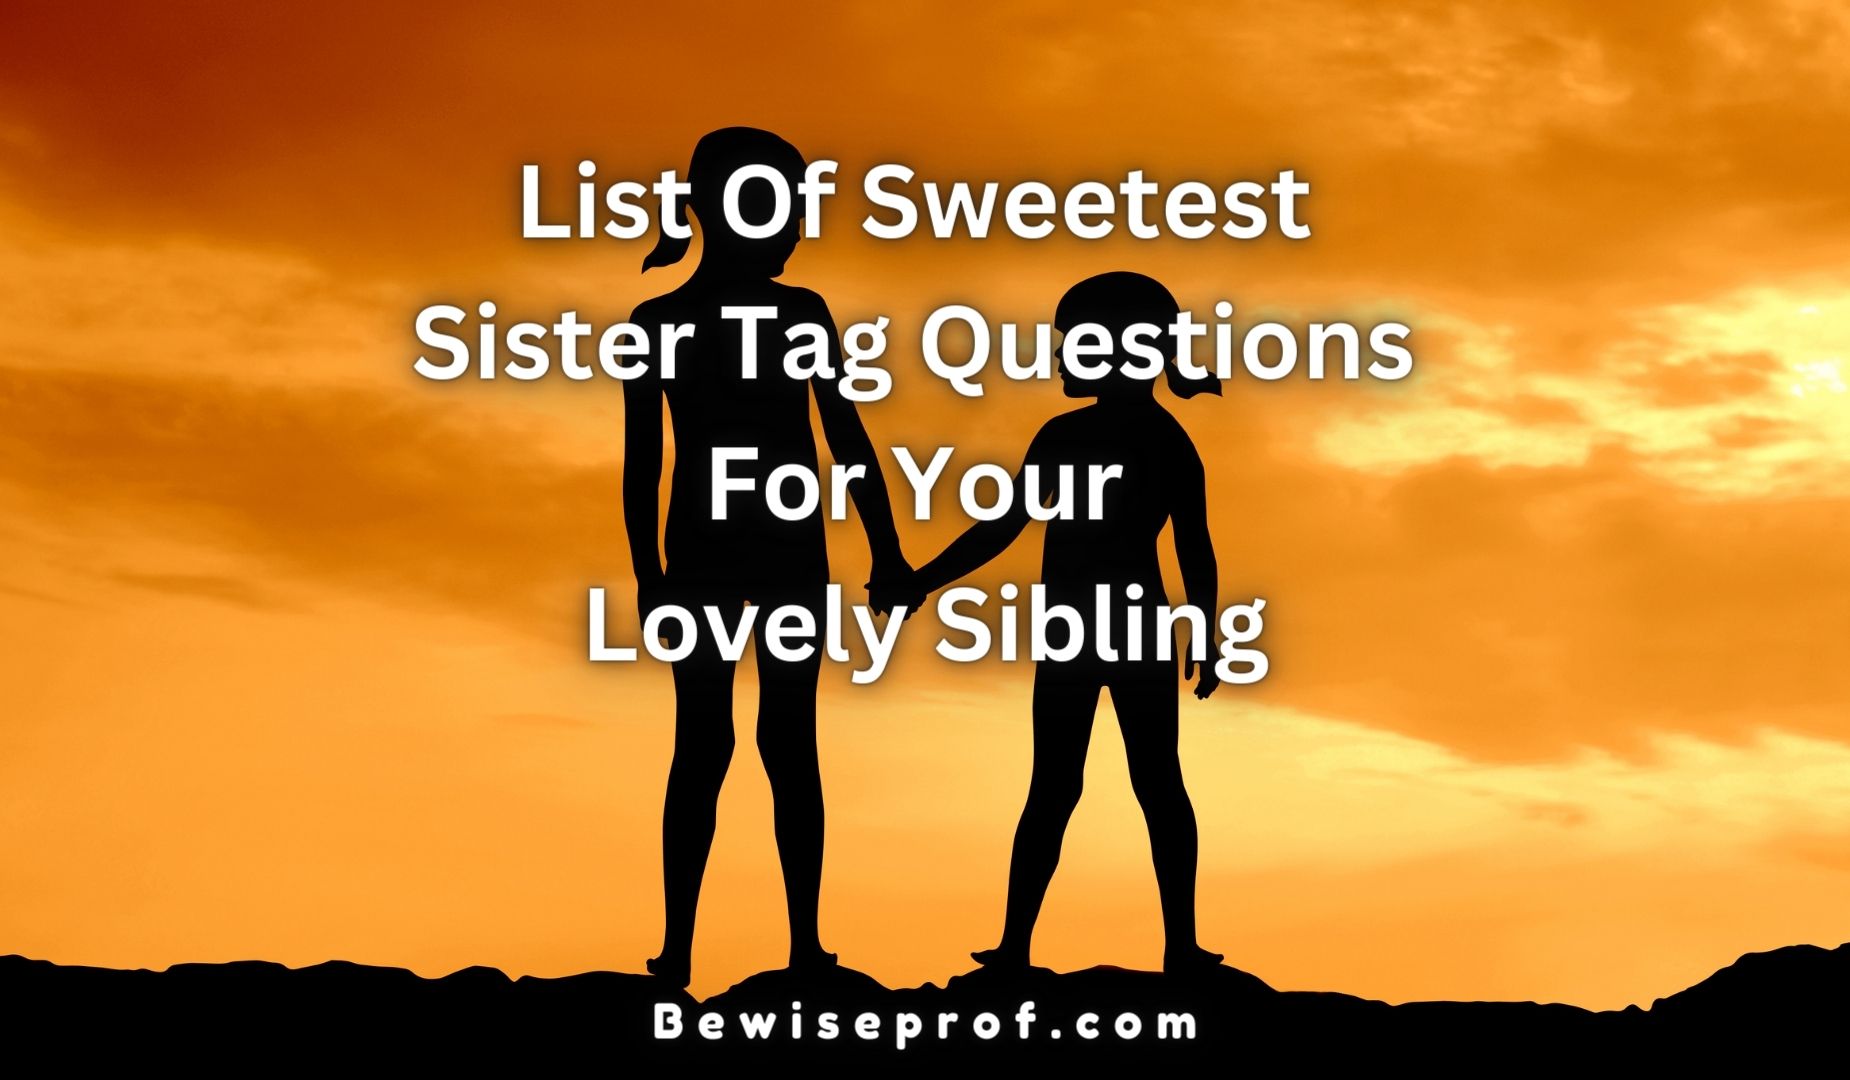 List Of Sweetest Sister Tag Questions For Your Lovely Sibling